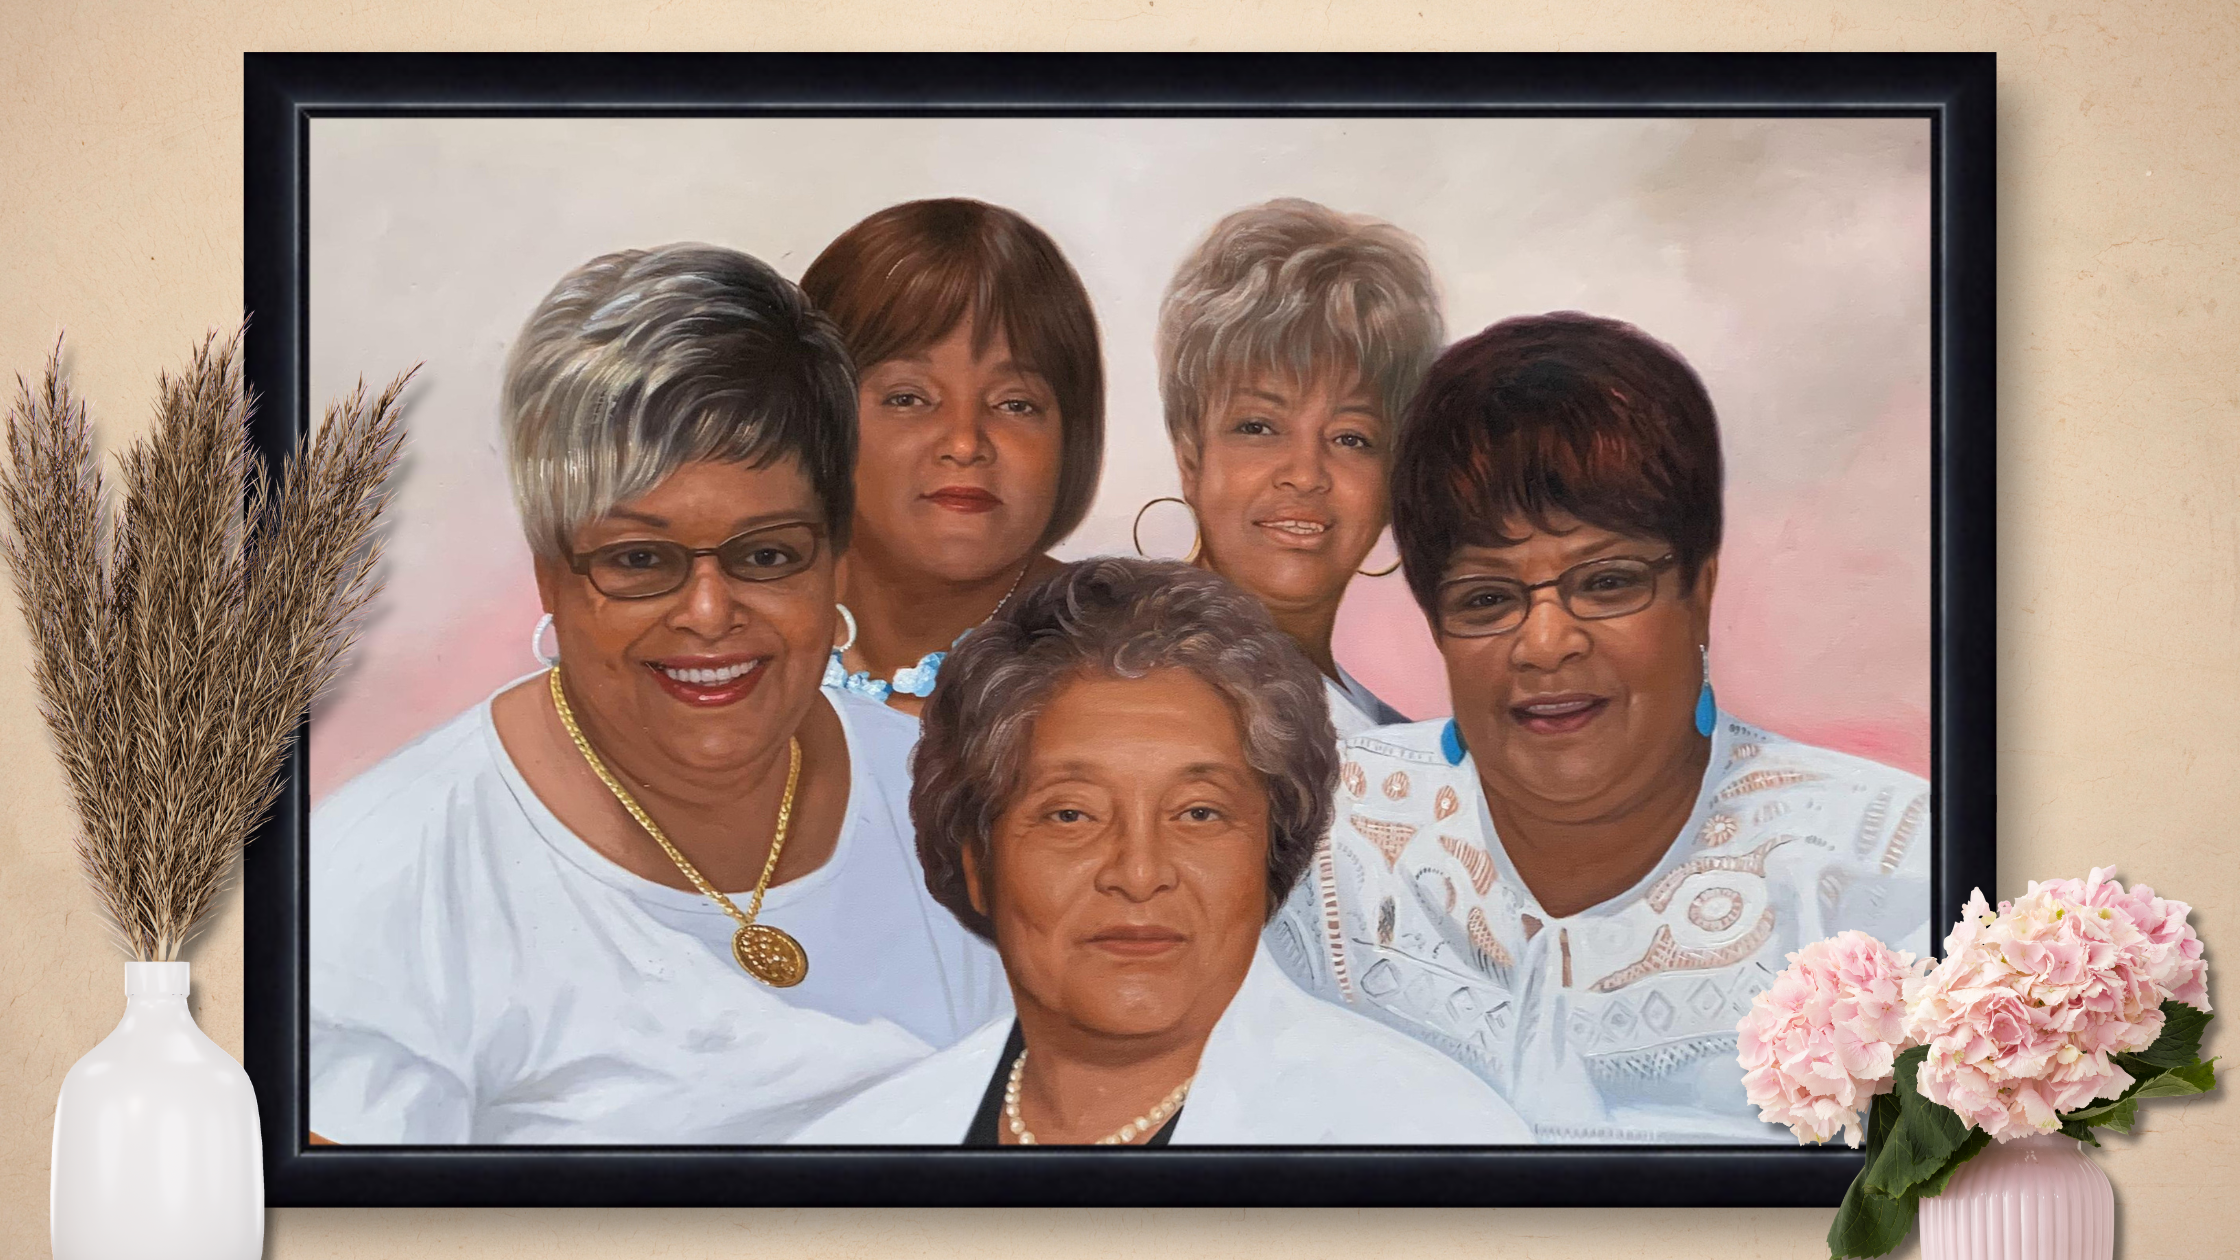 Portrait of 5 women, 4 sister and their late mother, the matriarch of the family.